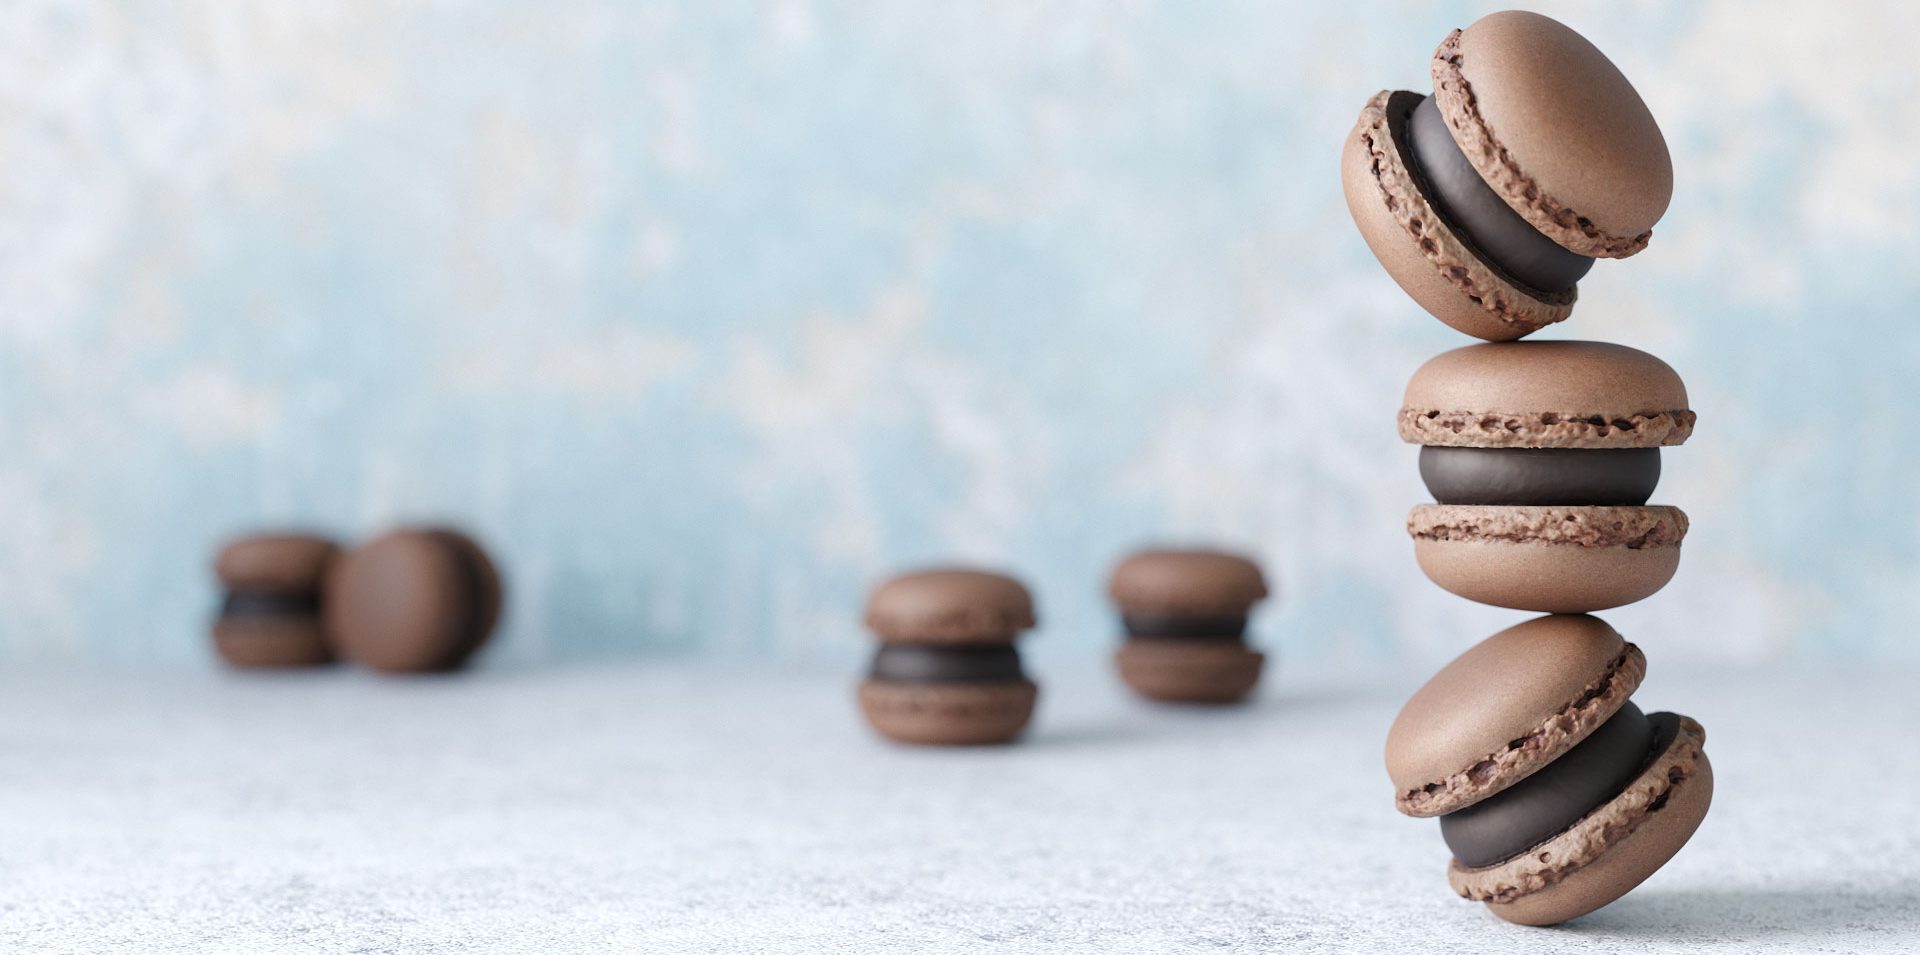 photorealistic close up rendering of a group of chocolate macaron 3d models on concrete